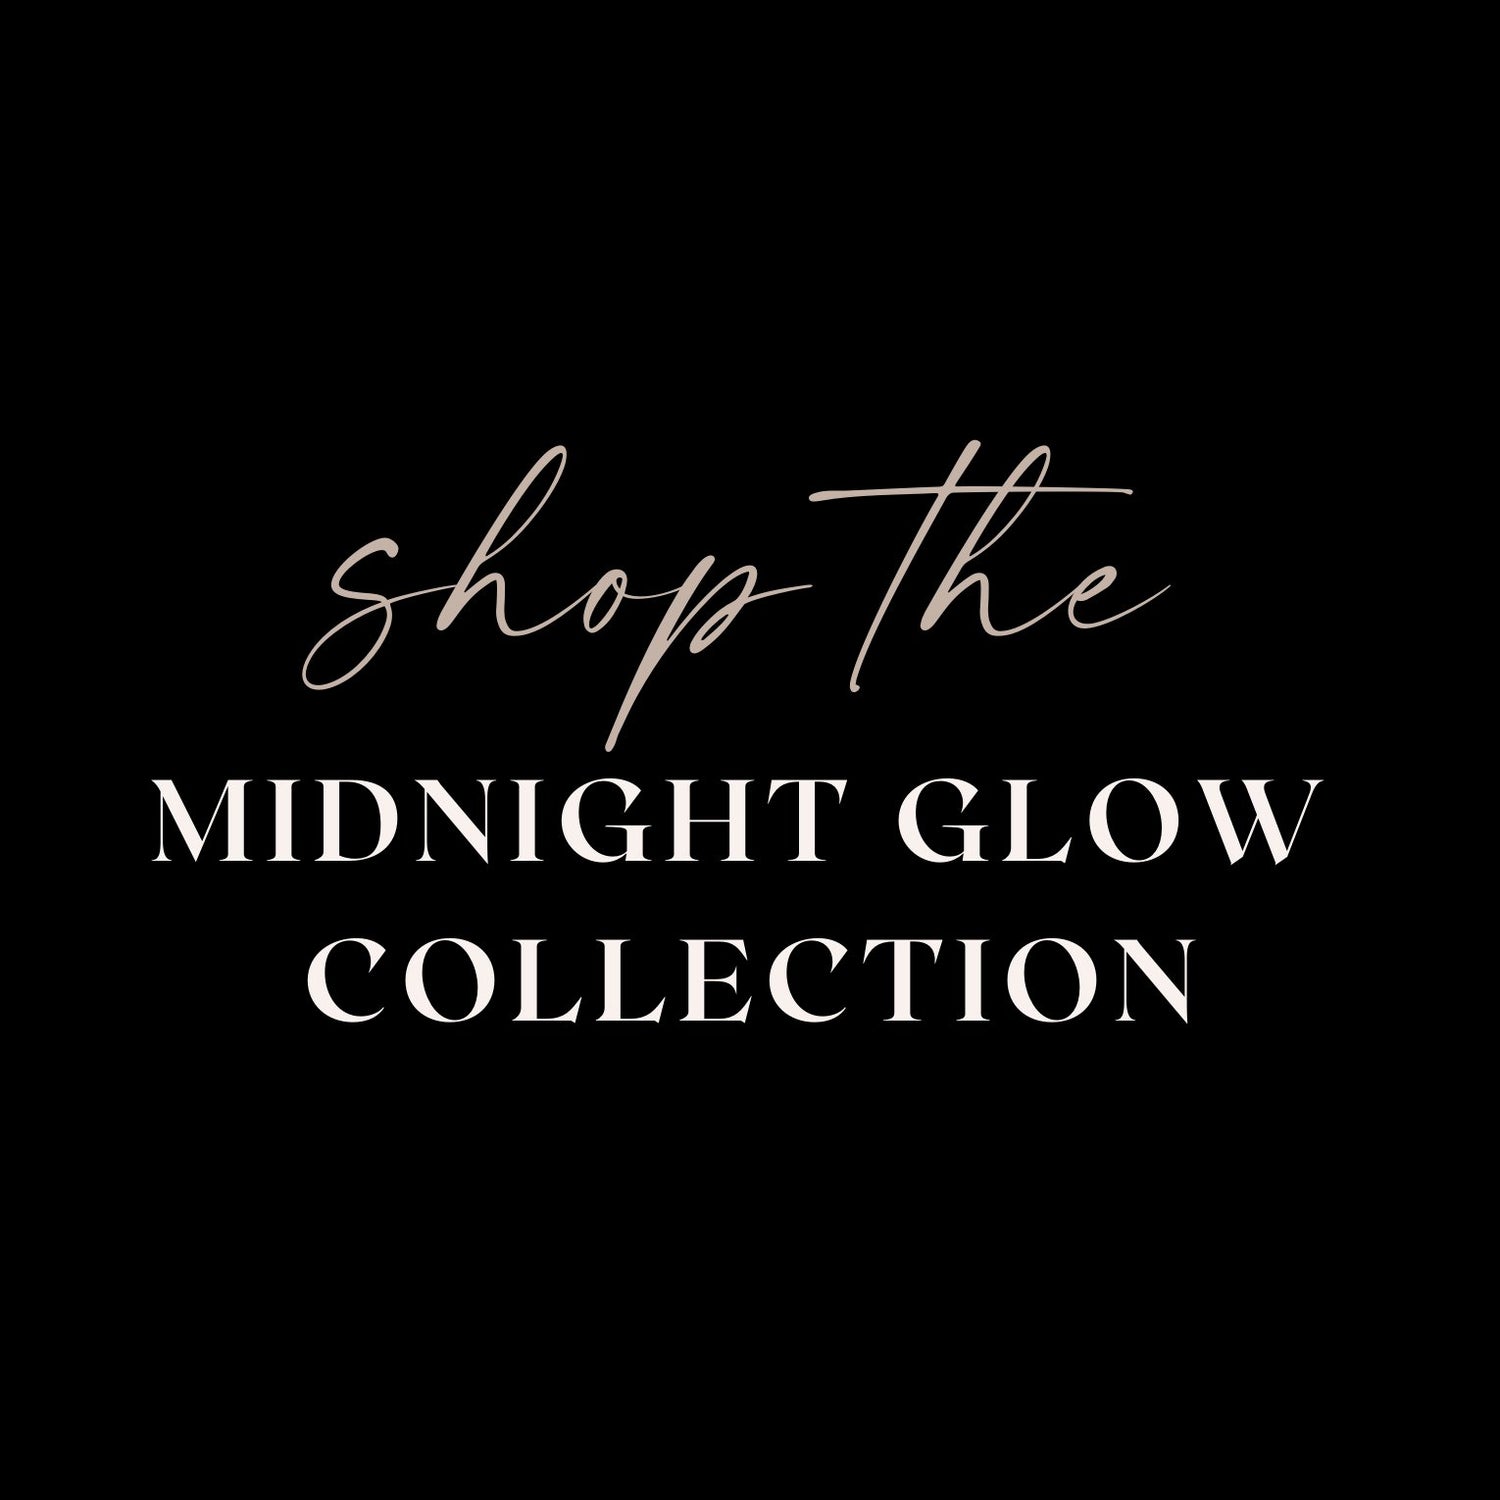 Midnight Glow Collection